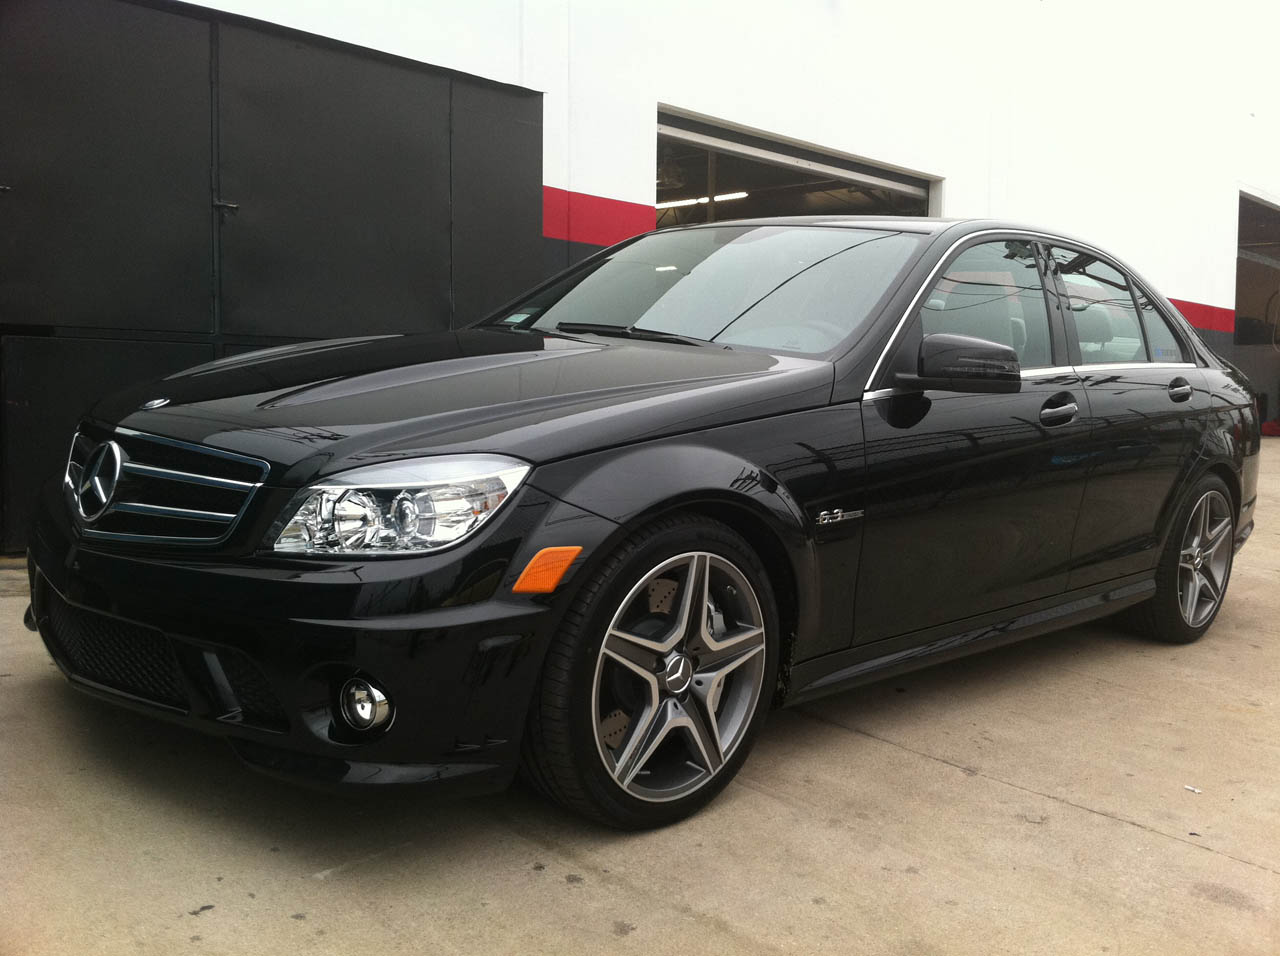  2011 Mercedes-Benz C63 AMG OE Tuning, Gintani Stg1 Exhaust, Street Tire